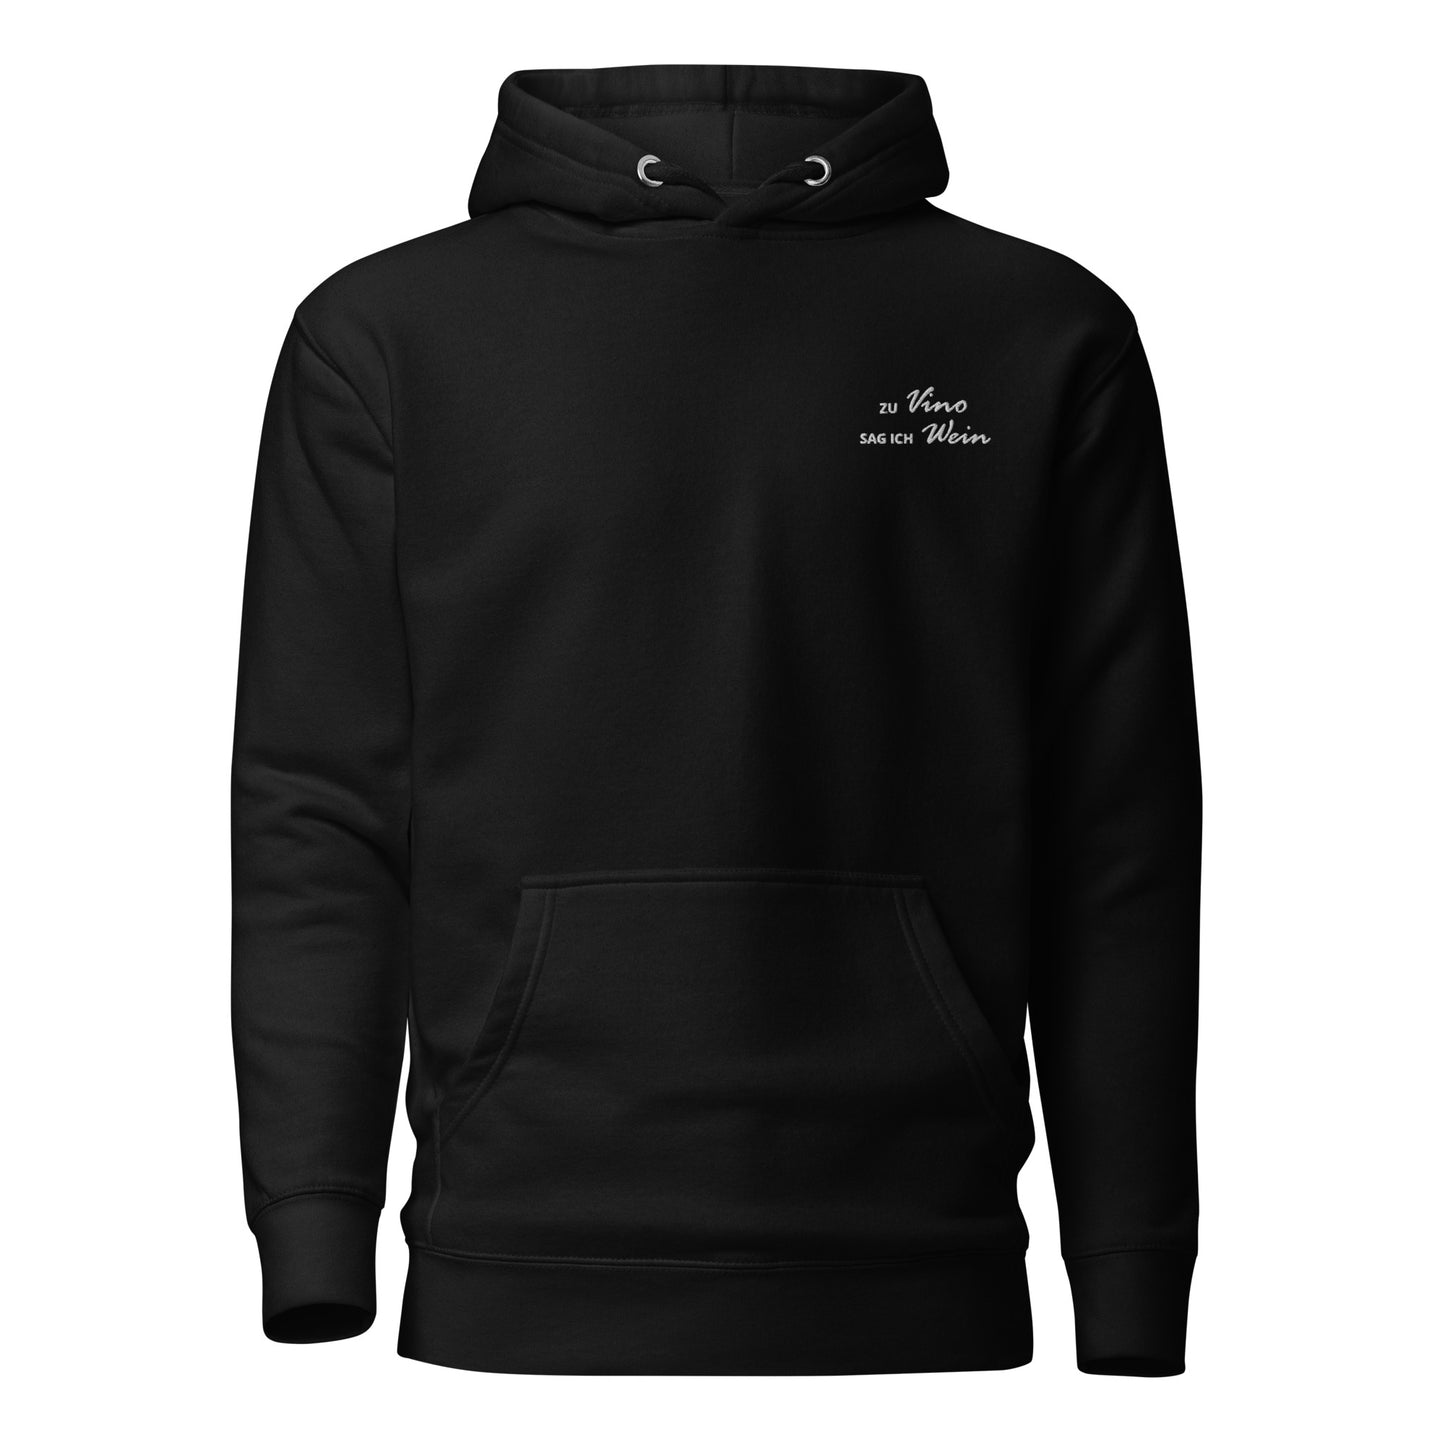 TO VINO I SAY WINE - embroidered hoodie